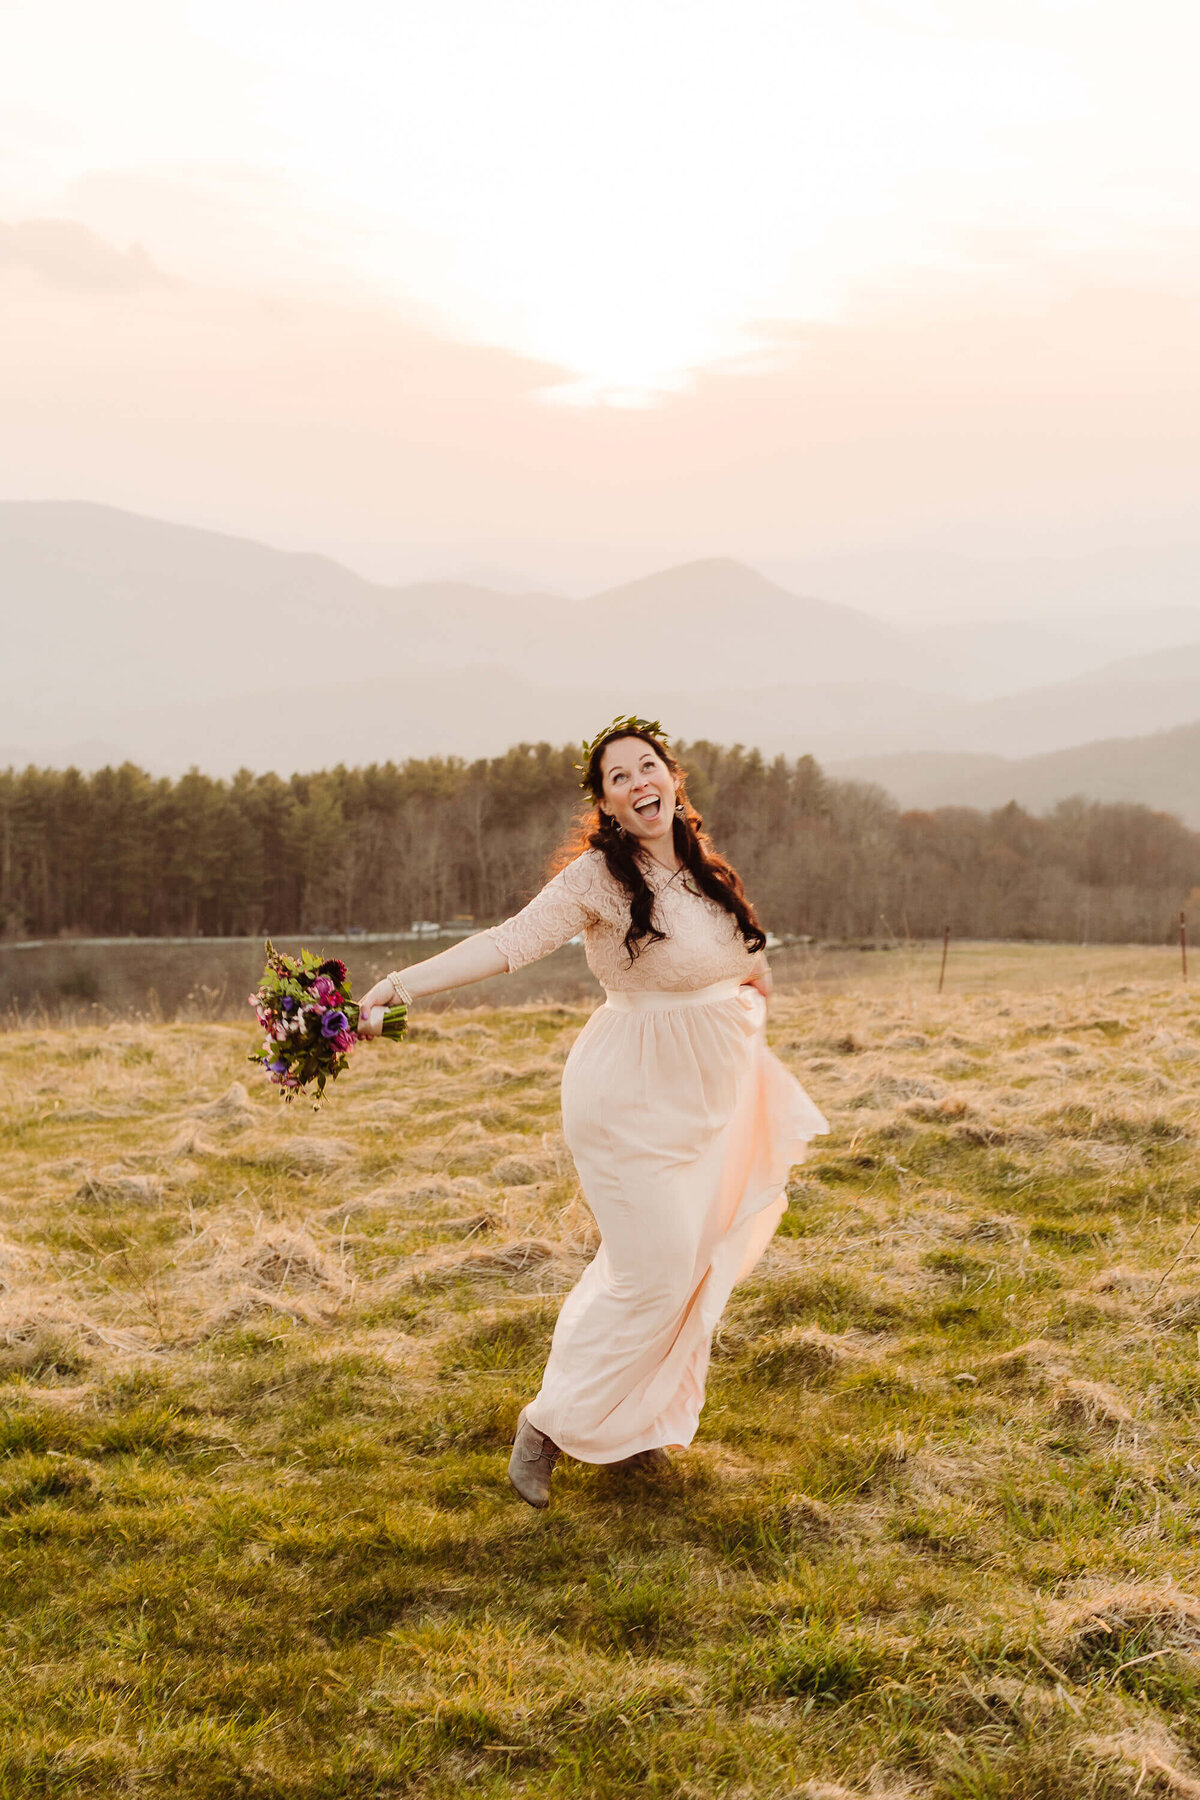 Max-Patch-Sunset-Mountain-Elopement-79